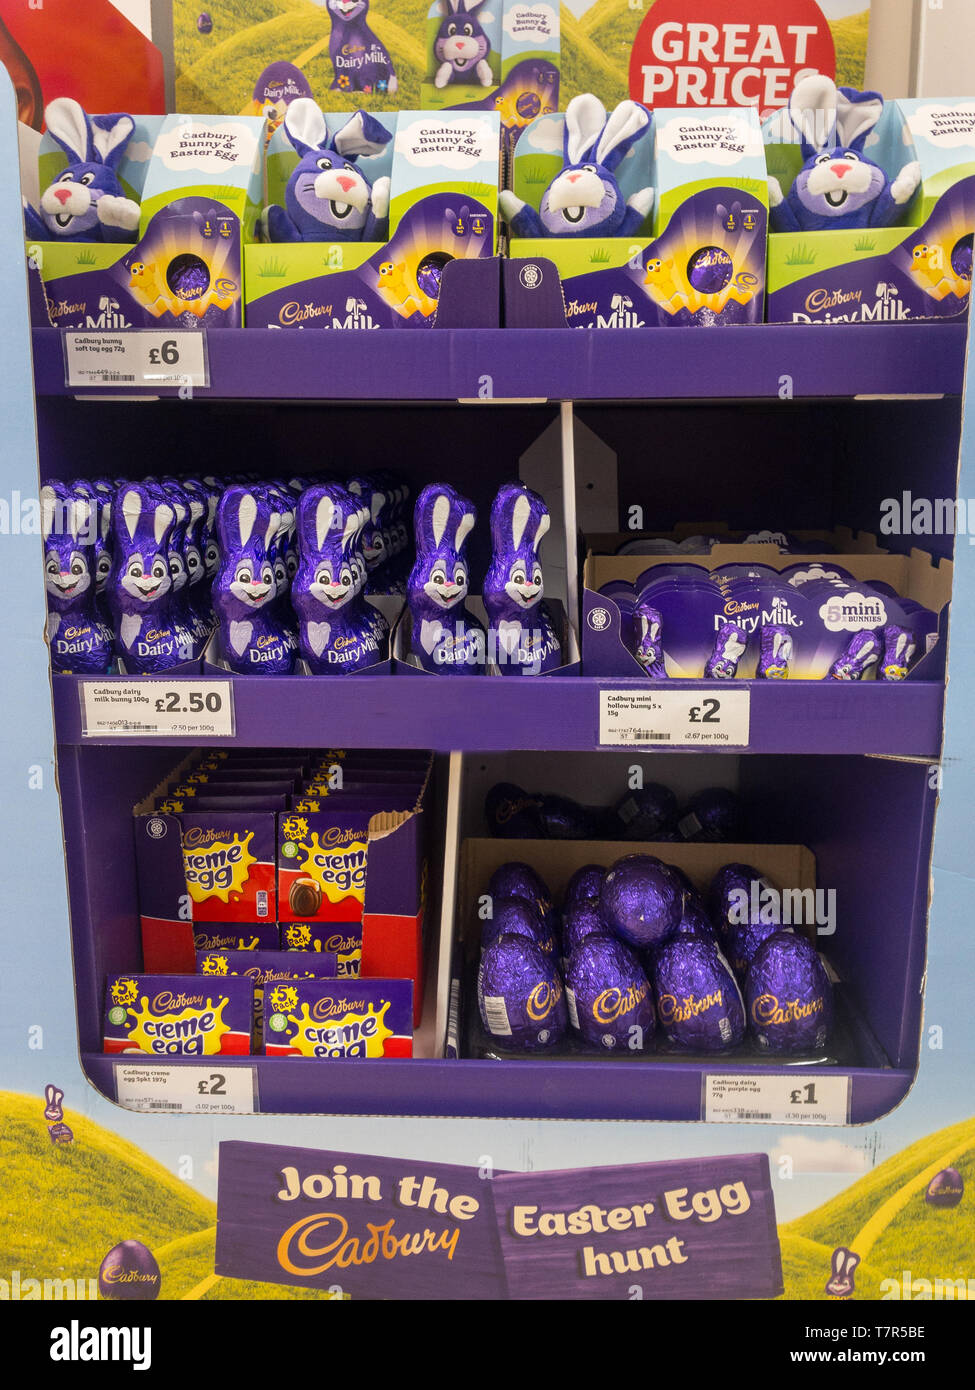 Exeter, Devon , England, March, 14, 2019: A supermarket in the UK end cap, selling chocolate Easter Eggs, chocolate Easter Bunnies. Lots of purple in the image Stock Photo